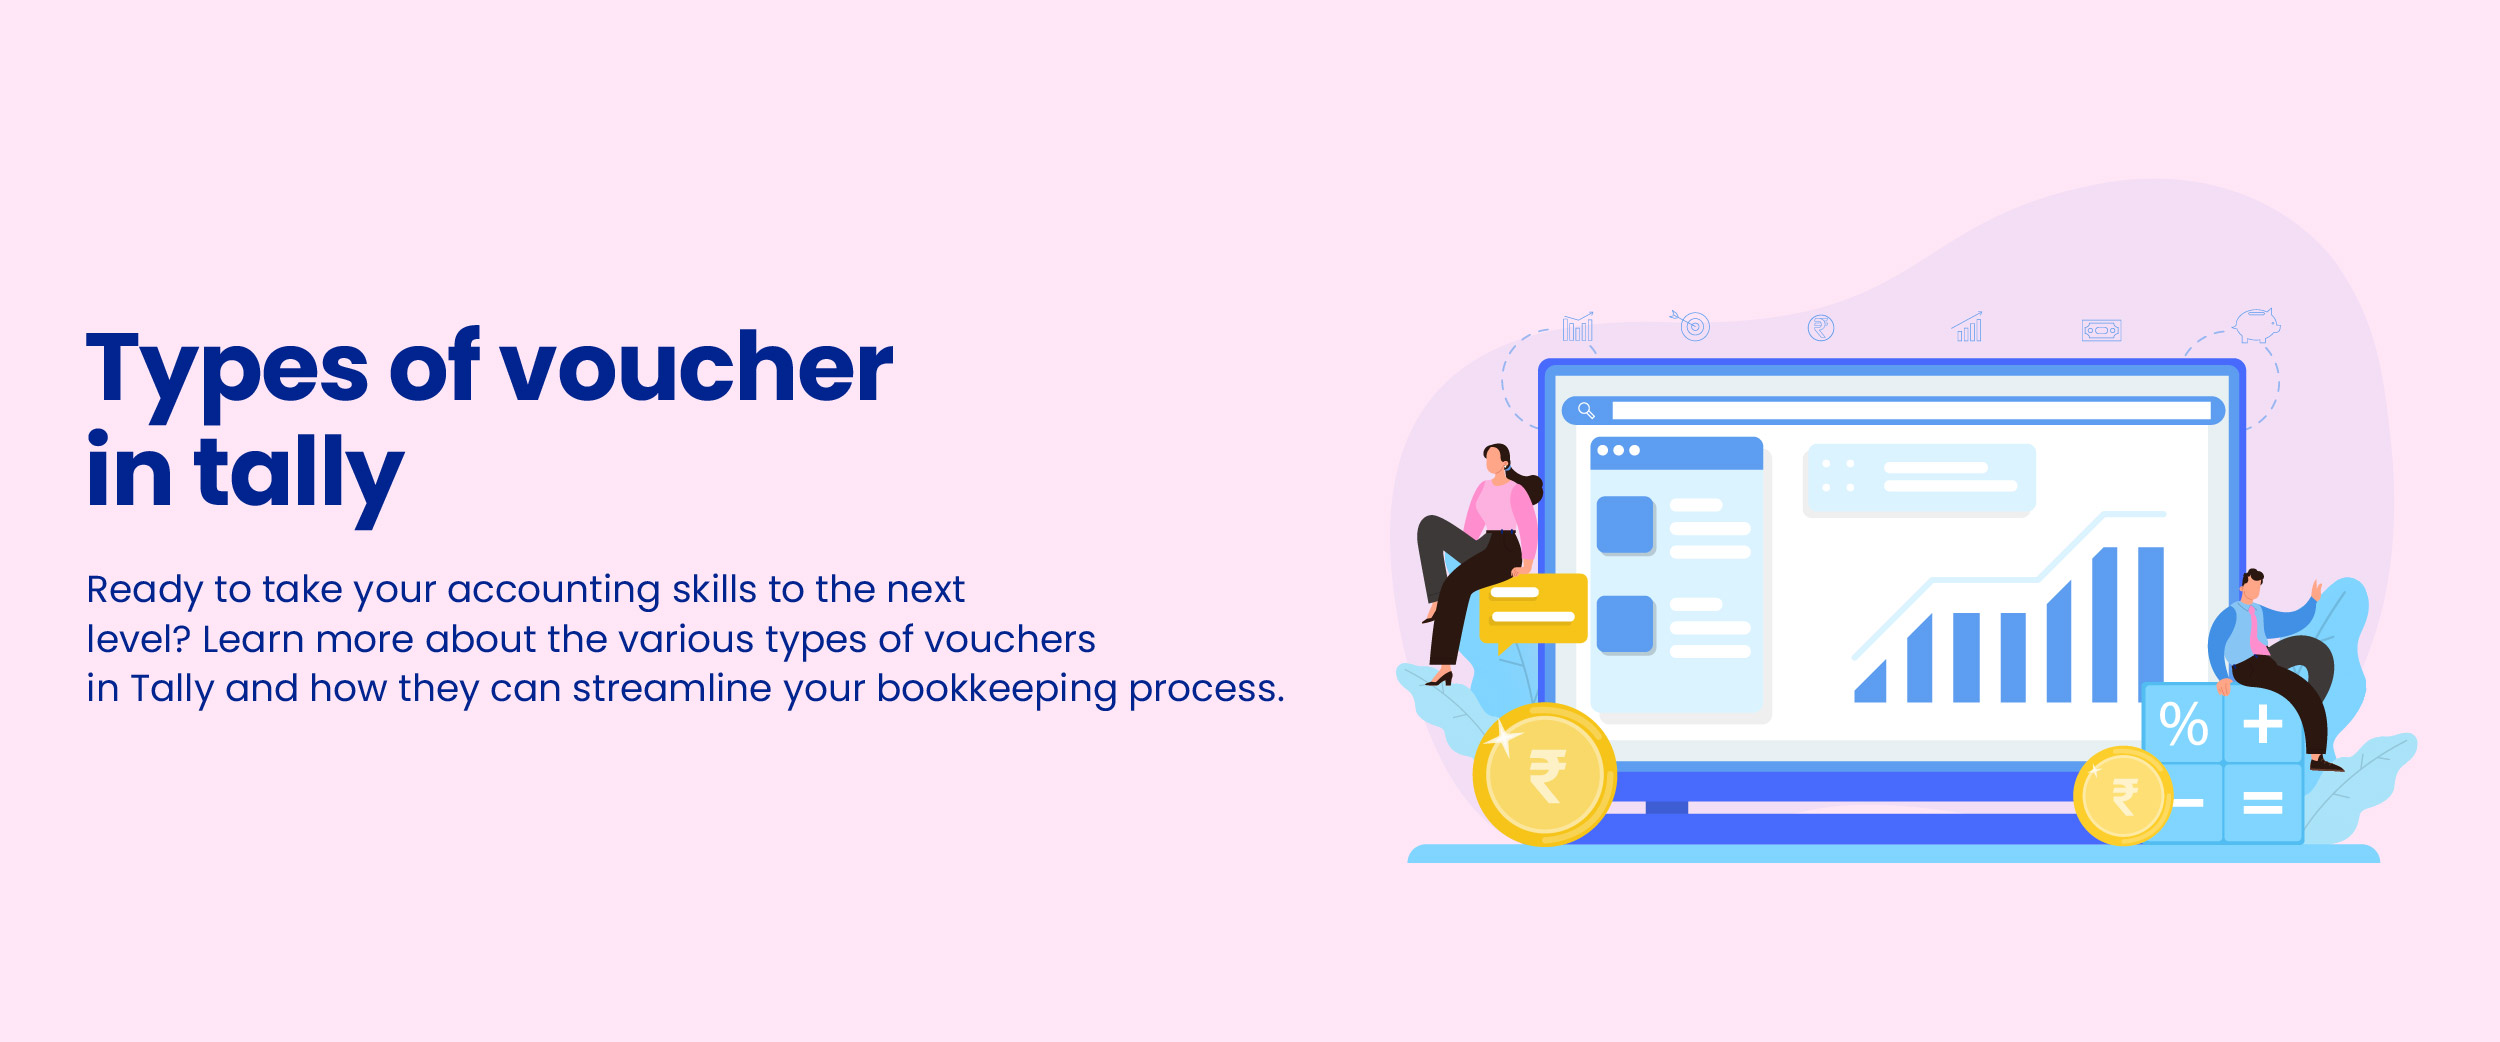 Types of vouchers tally